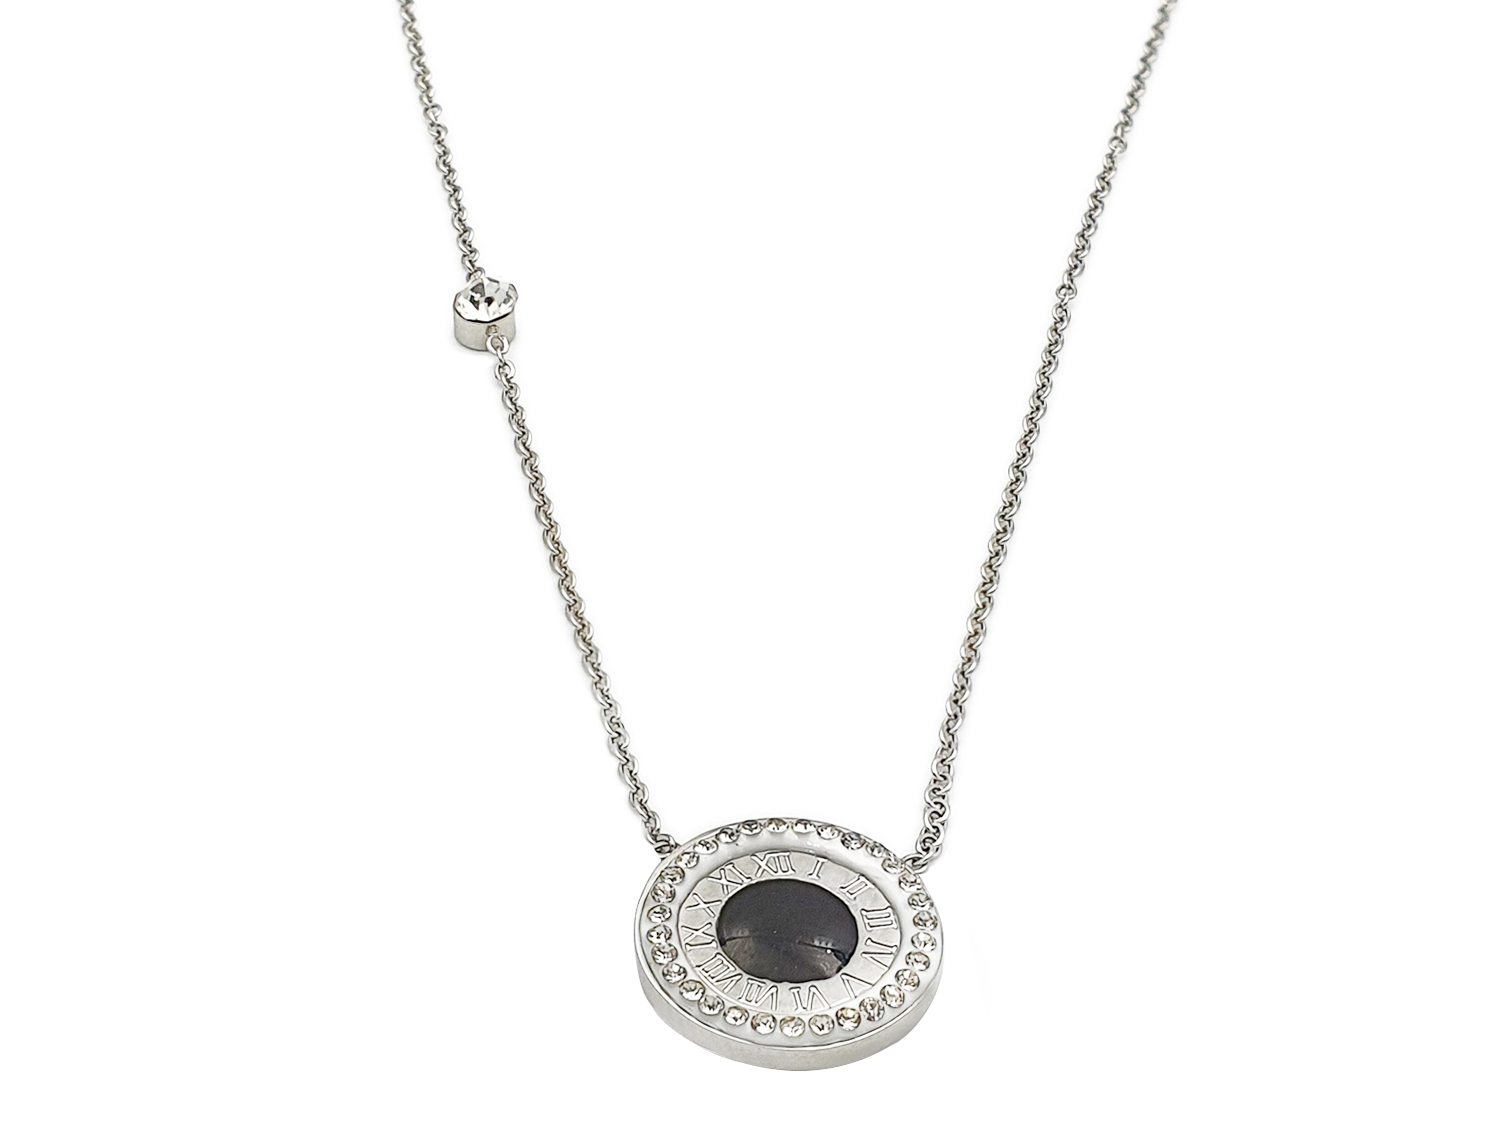 Sparking Small Evil Eye Necklace  - Adema